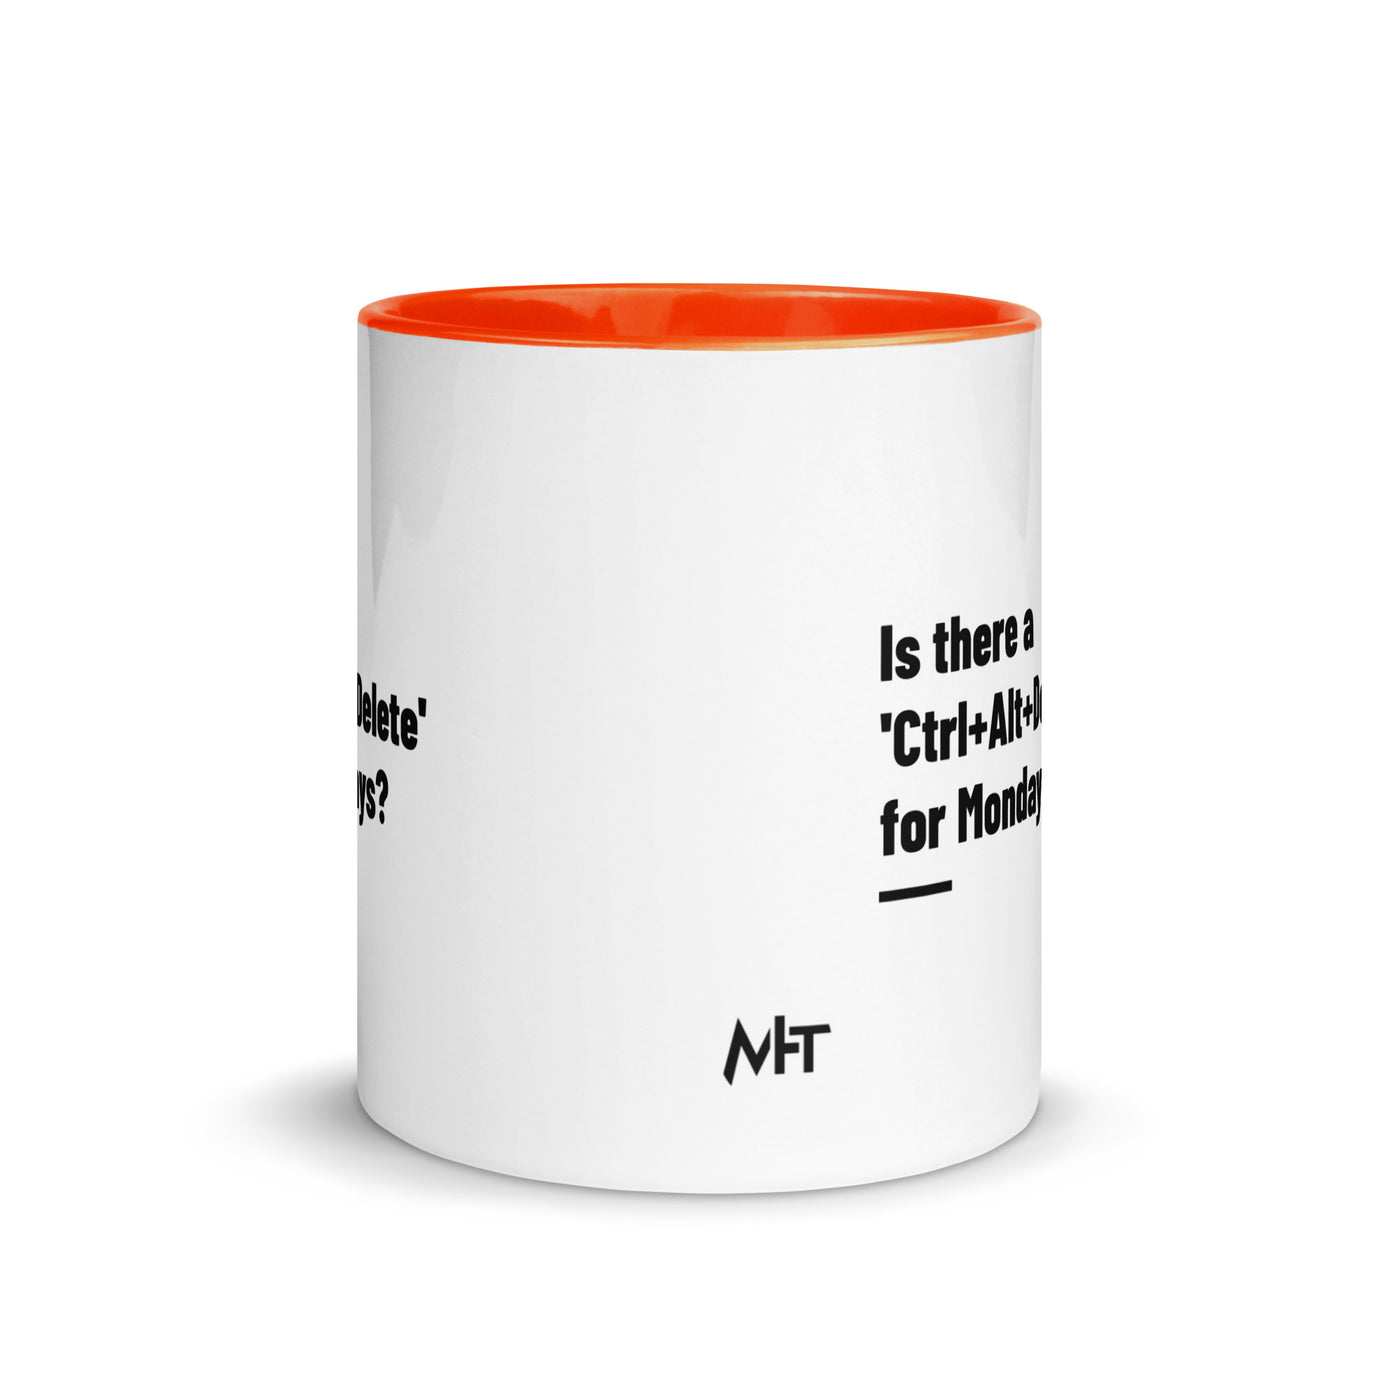 Is there a 'Ctrl+Alt+Delete' for Mondays? - Mug with Color Inside